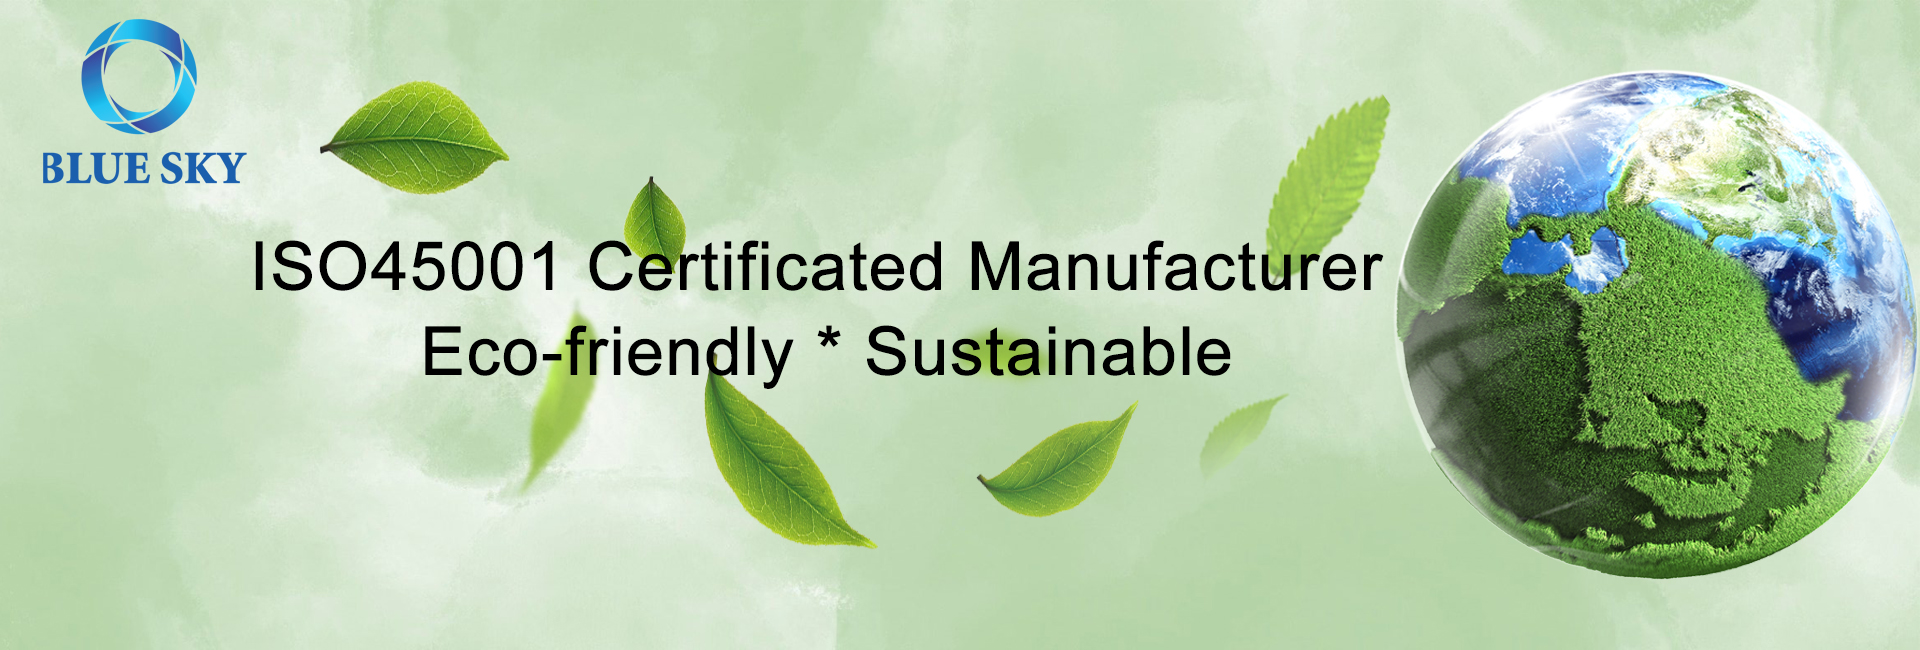 ISO45001 Certificated Manufacturer Eco-friendly Sustainable